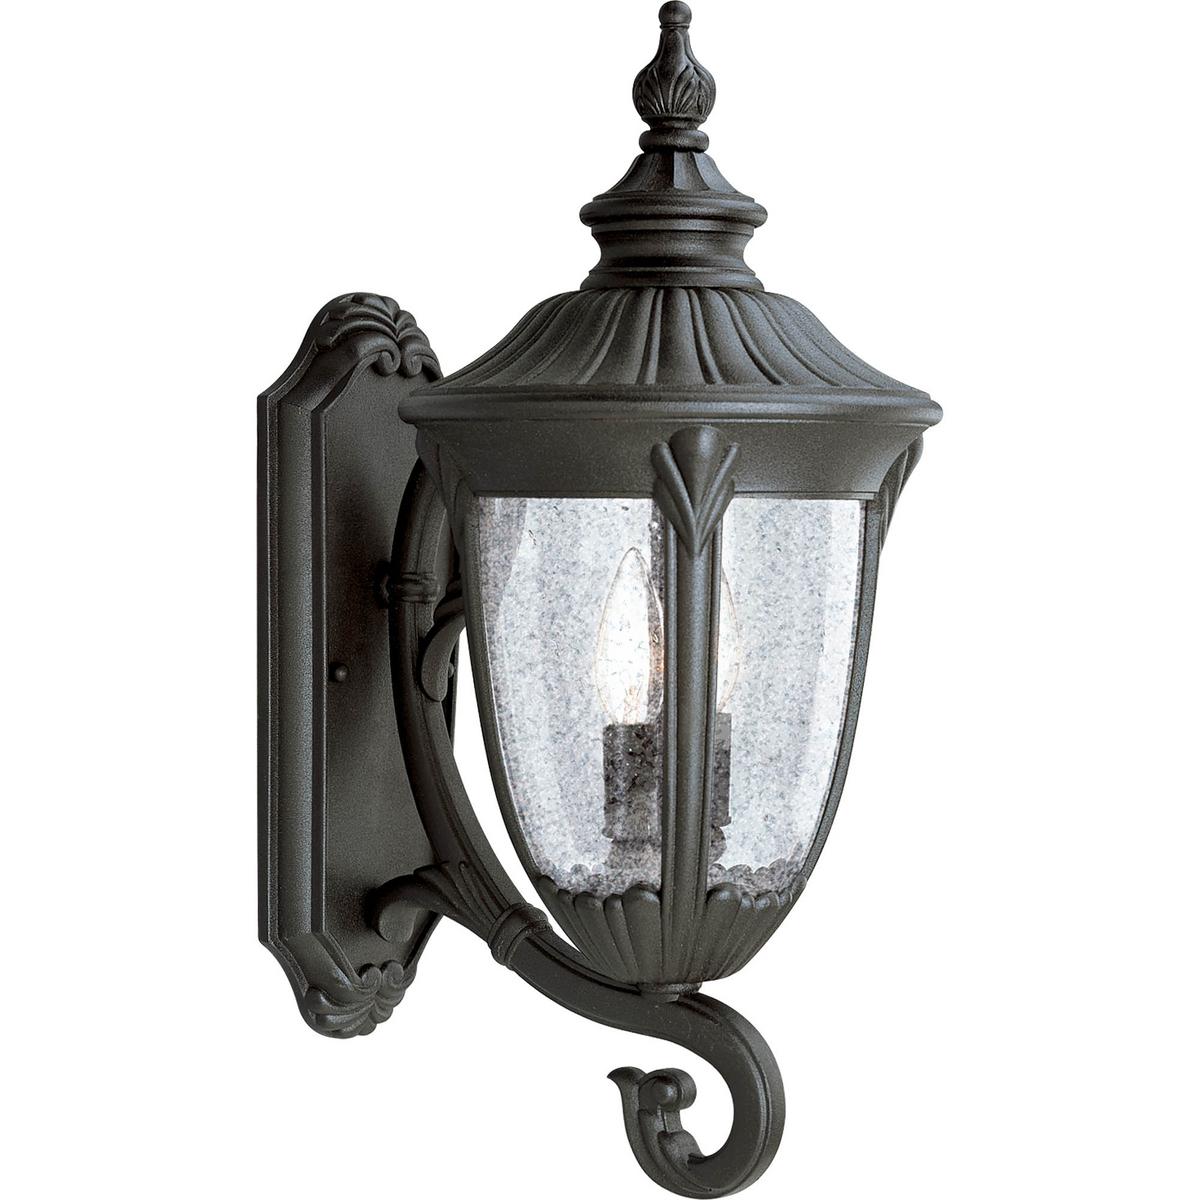 Hubbell P5823-31 The Meridian Collection features decorative shepherd hooks and acanthus cast arms. Clear, seed glass urns finishes off the distinctive and stately feeling of old world elegance. The two-light cast aluminum large wall lantern has a durable Textured Black p